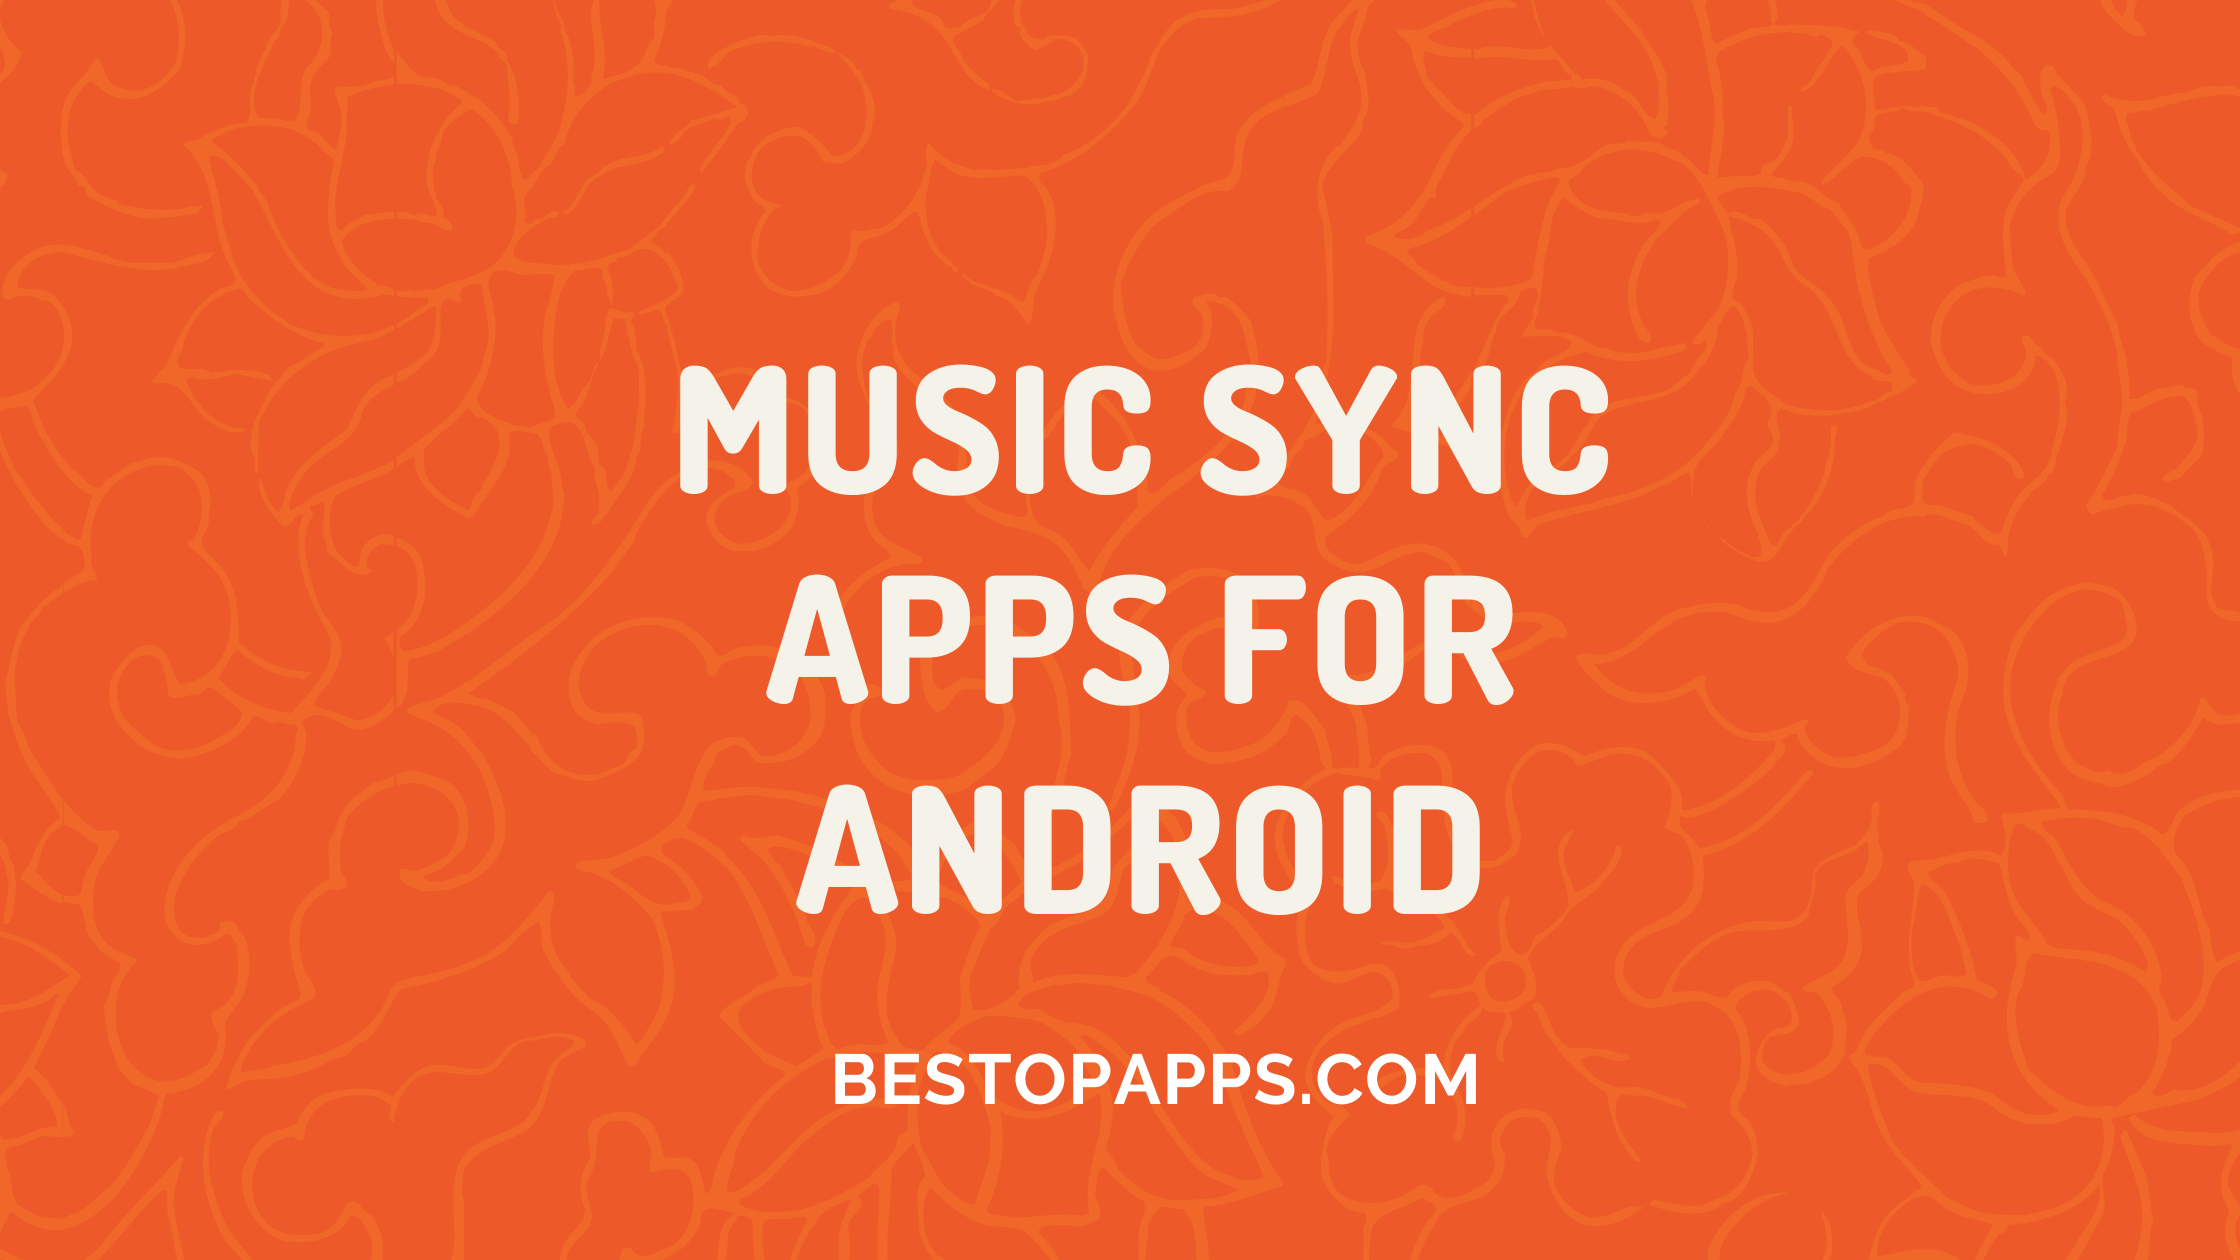 Music Sync Apps for Android